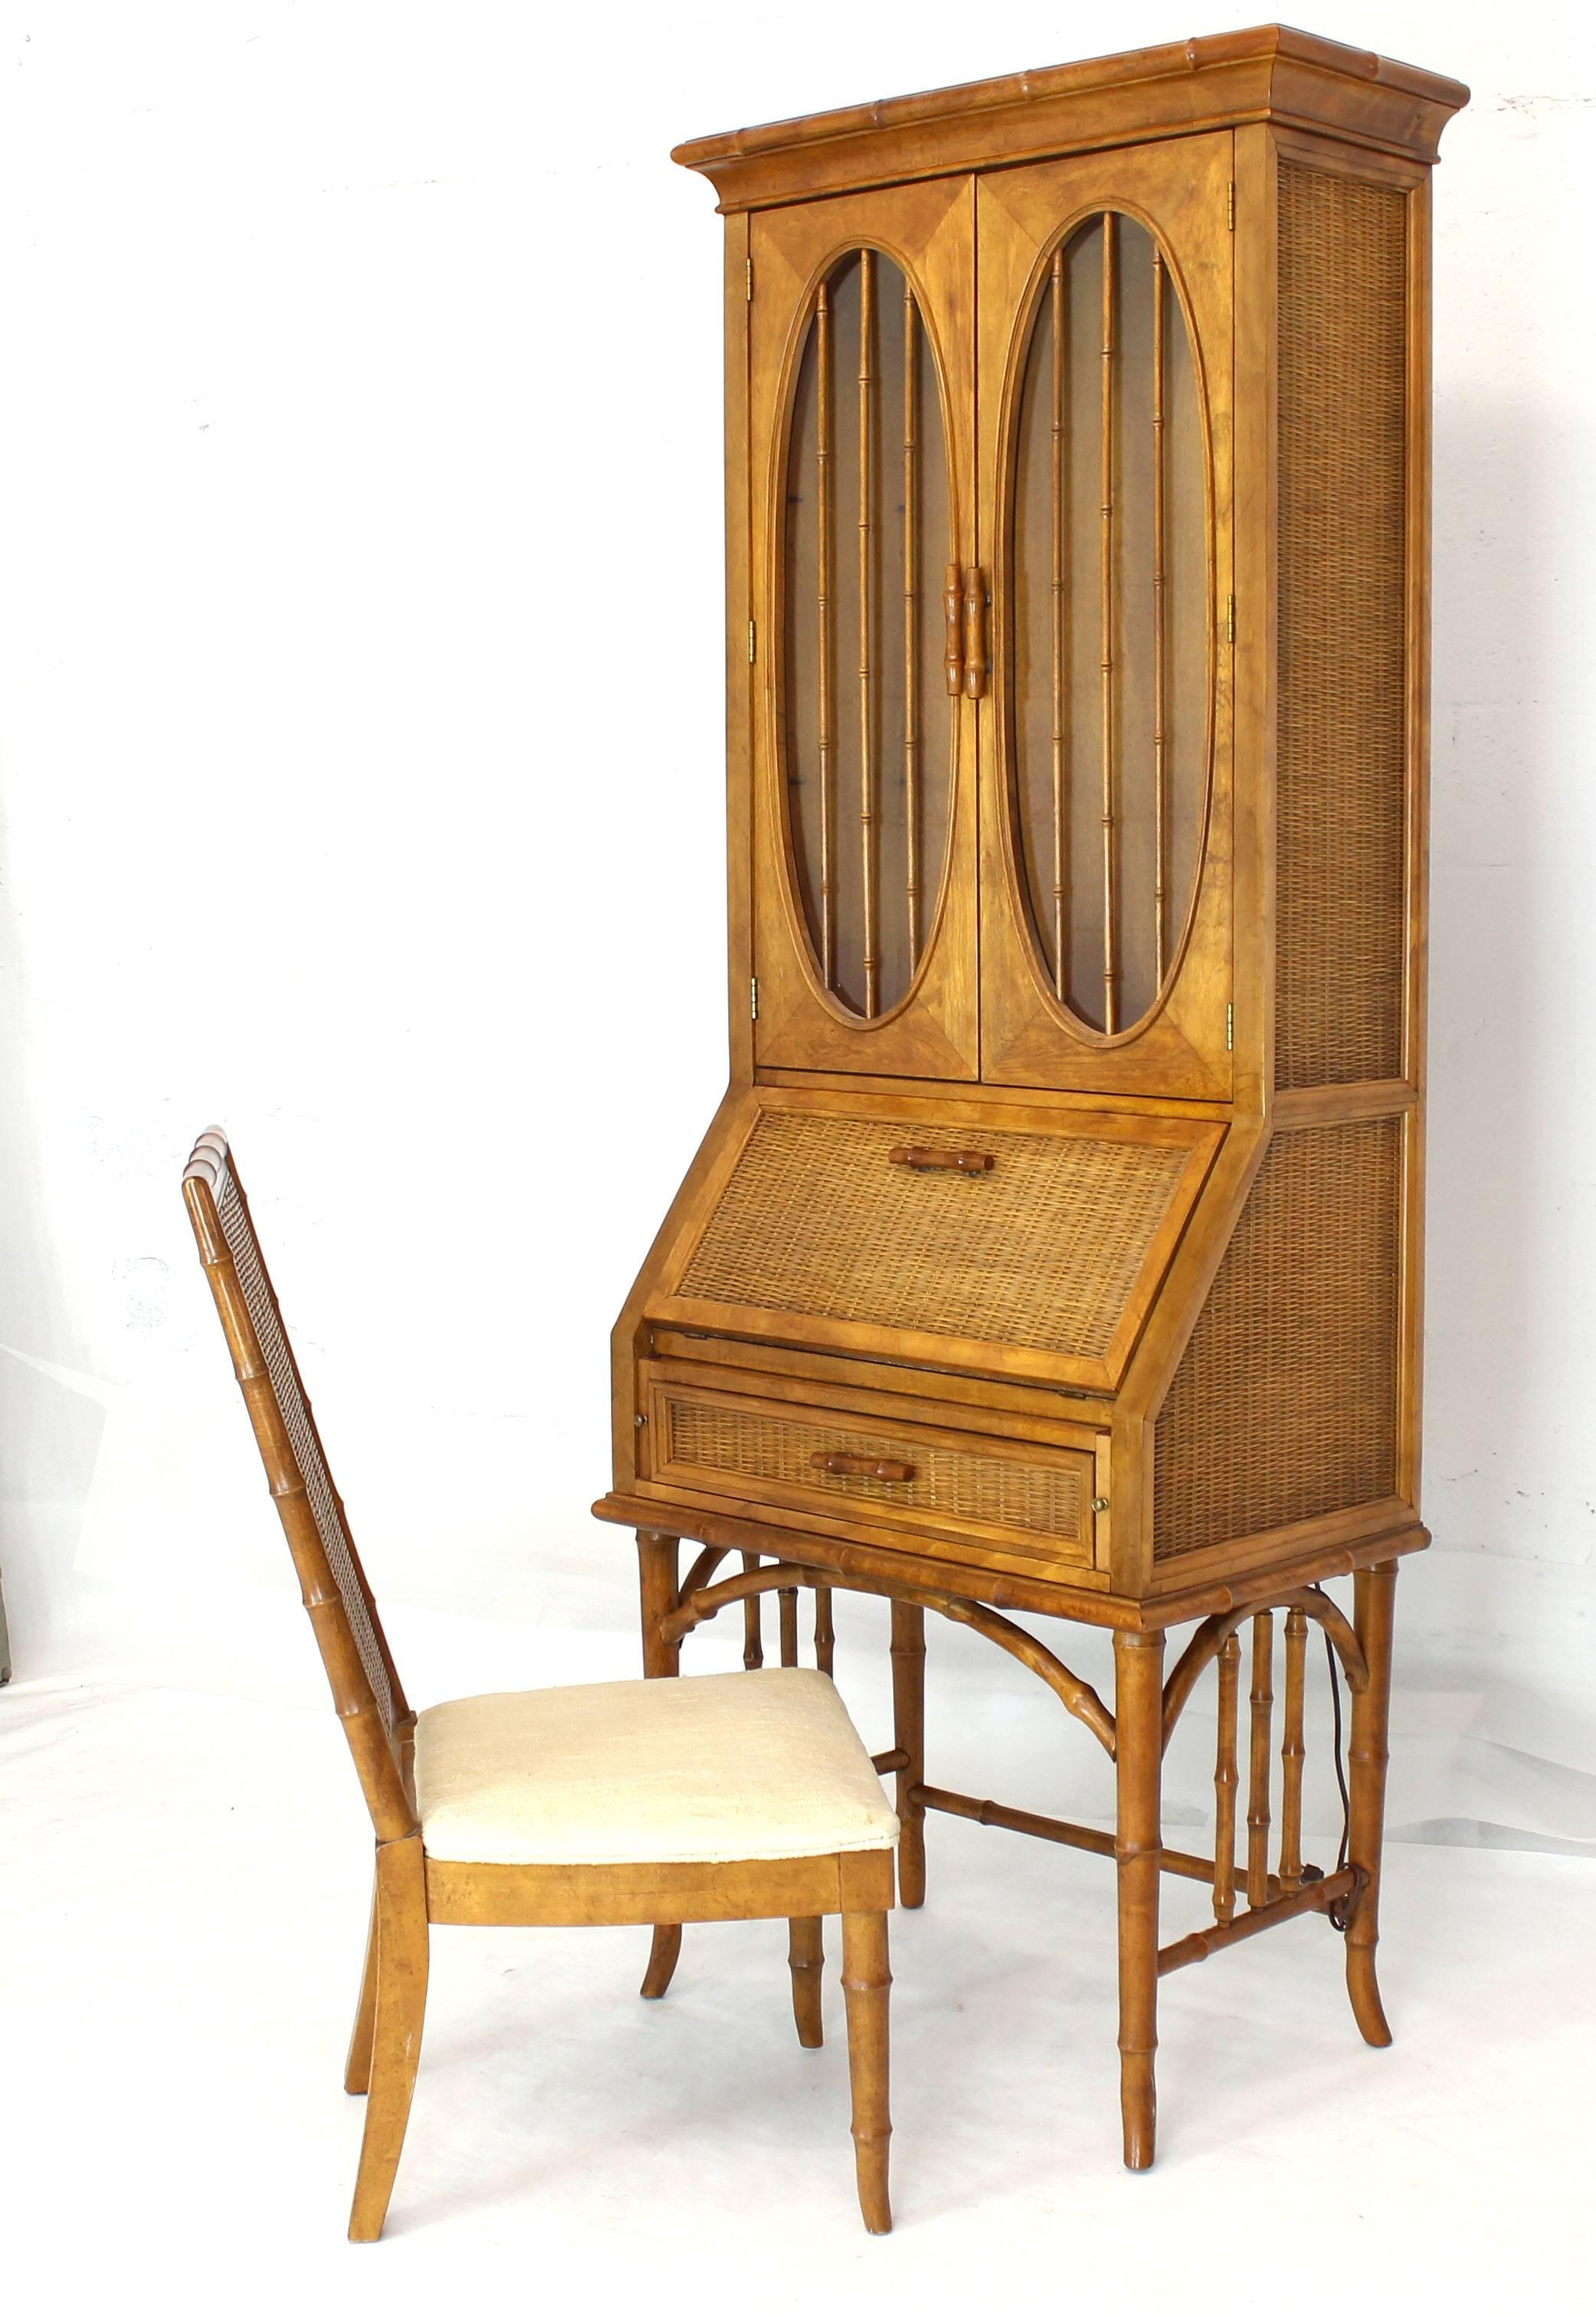 Highly decorative faux bamboo oval windows rattan secretary drop front desk cabinet bookcase with matching chair. The cabinet has interior light.